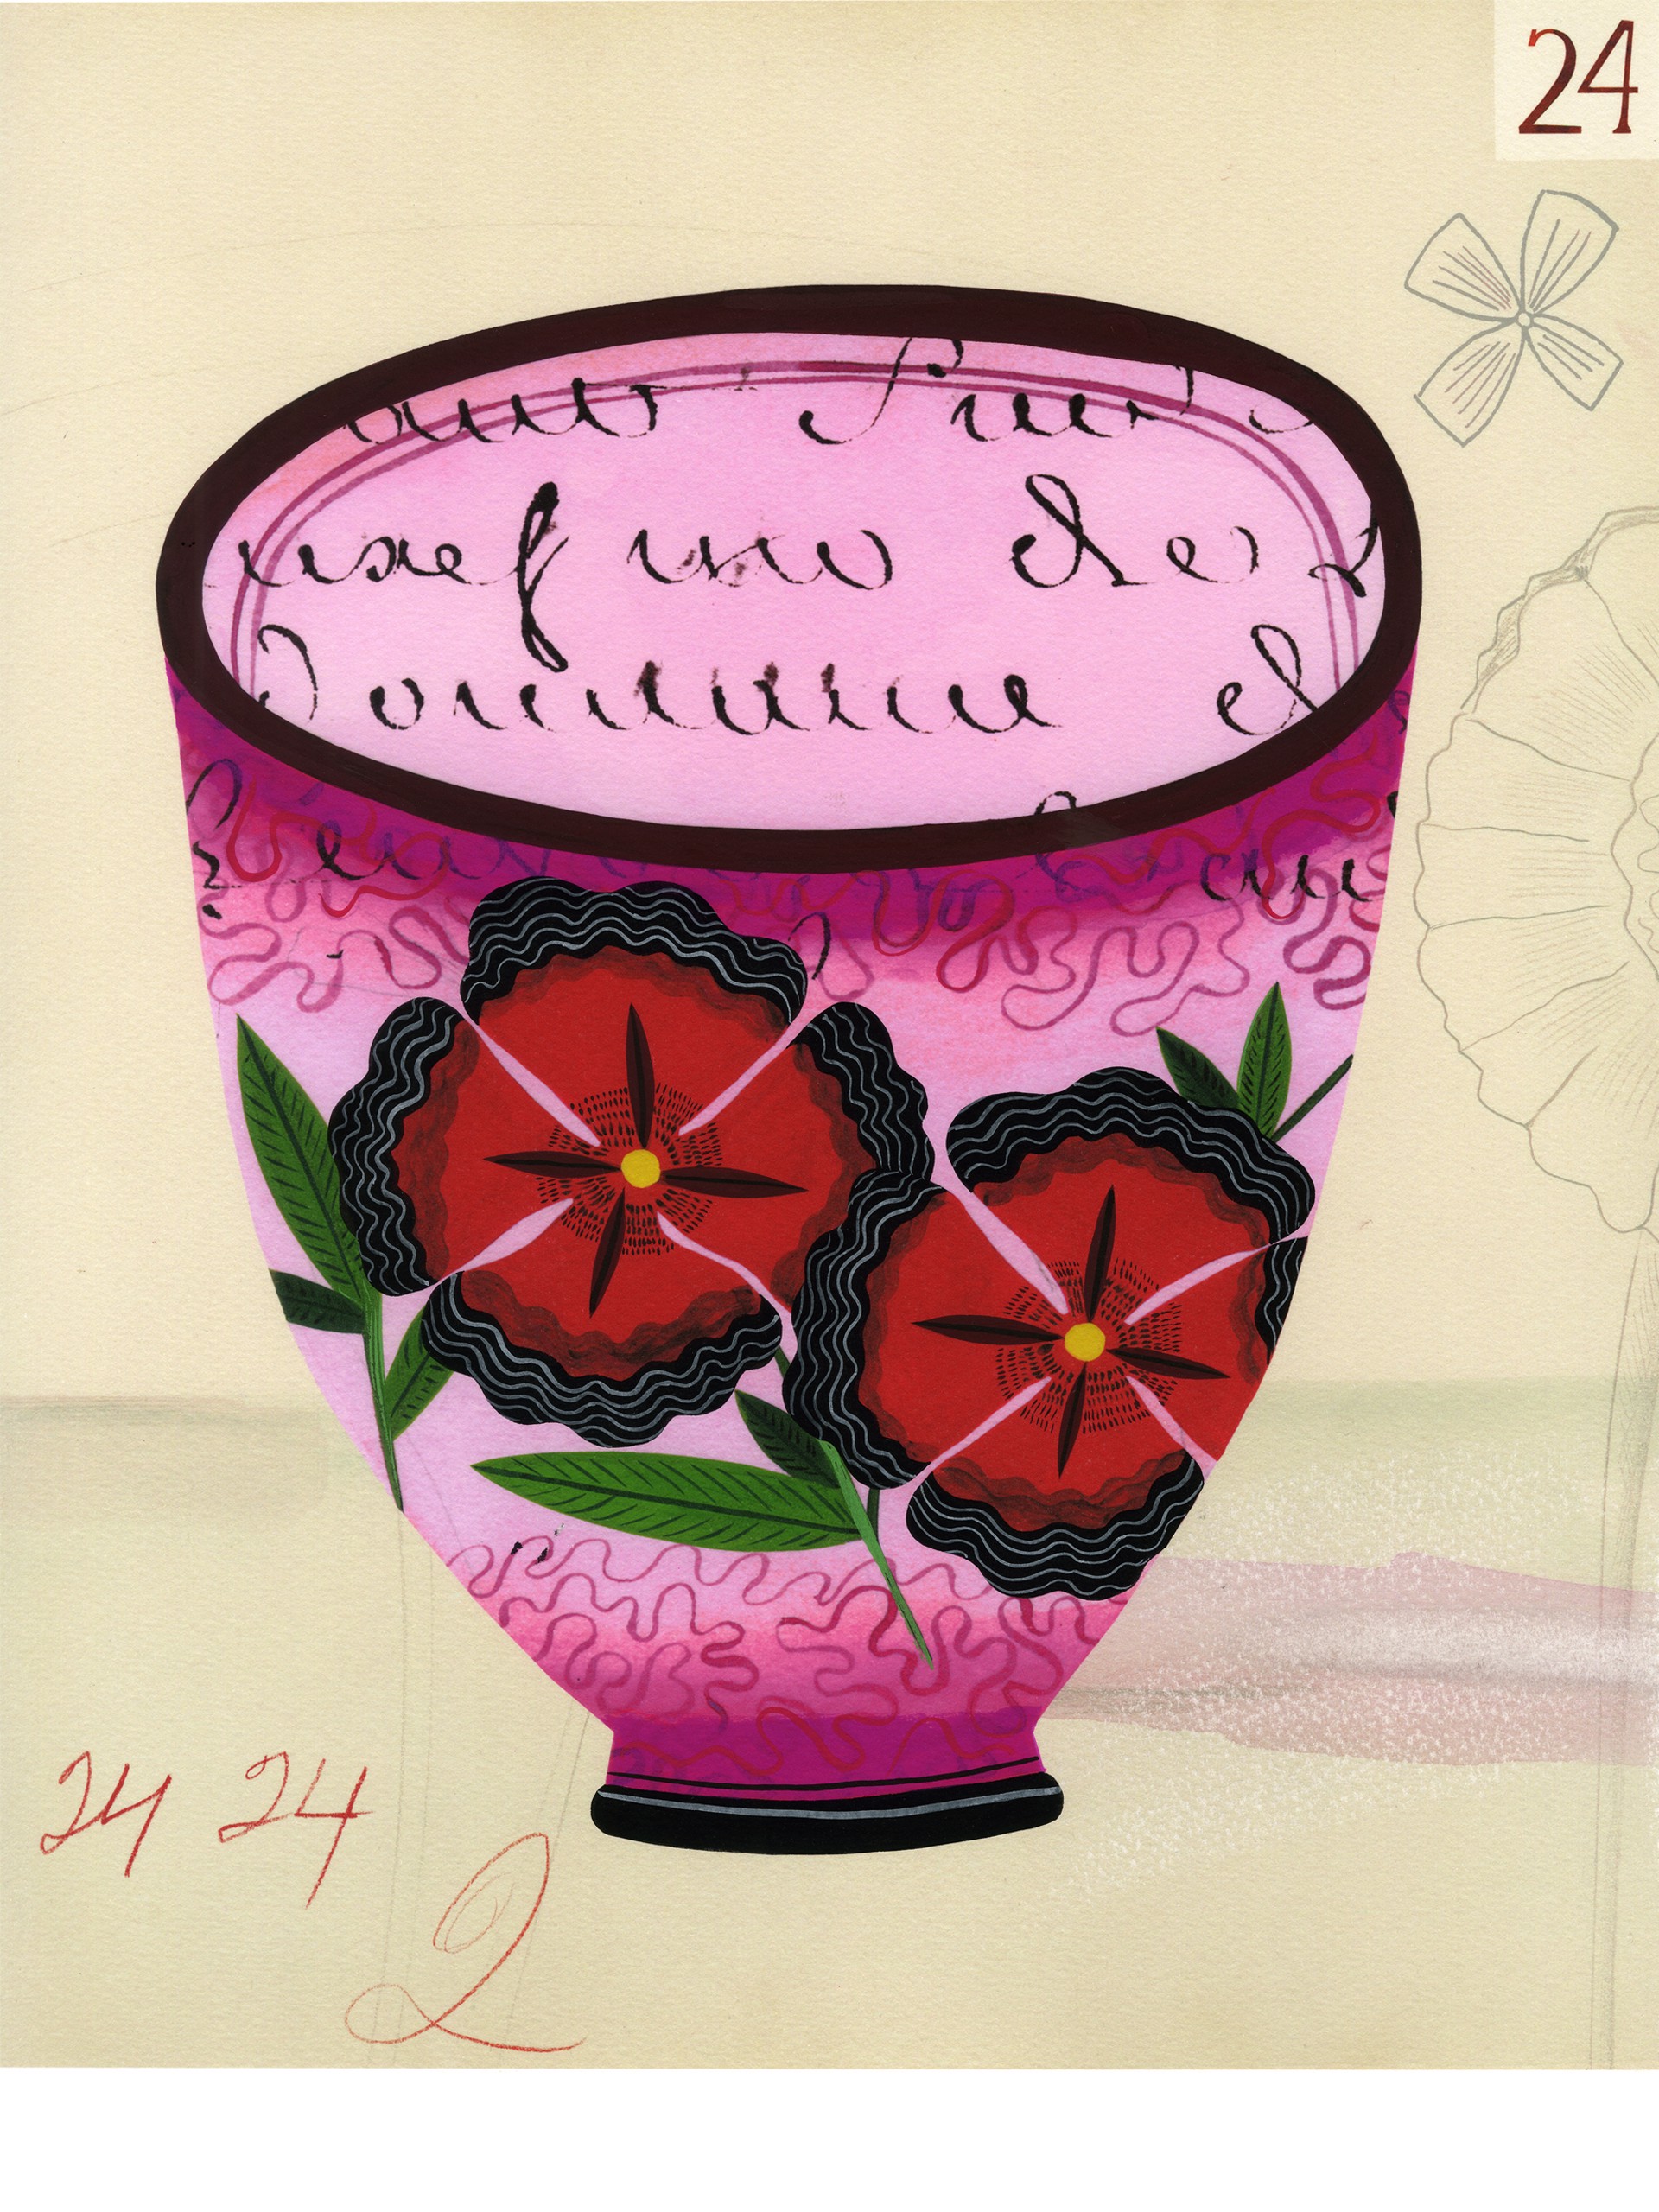 Cup No. 24 by Anne Smith